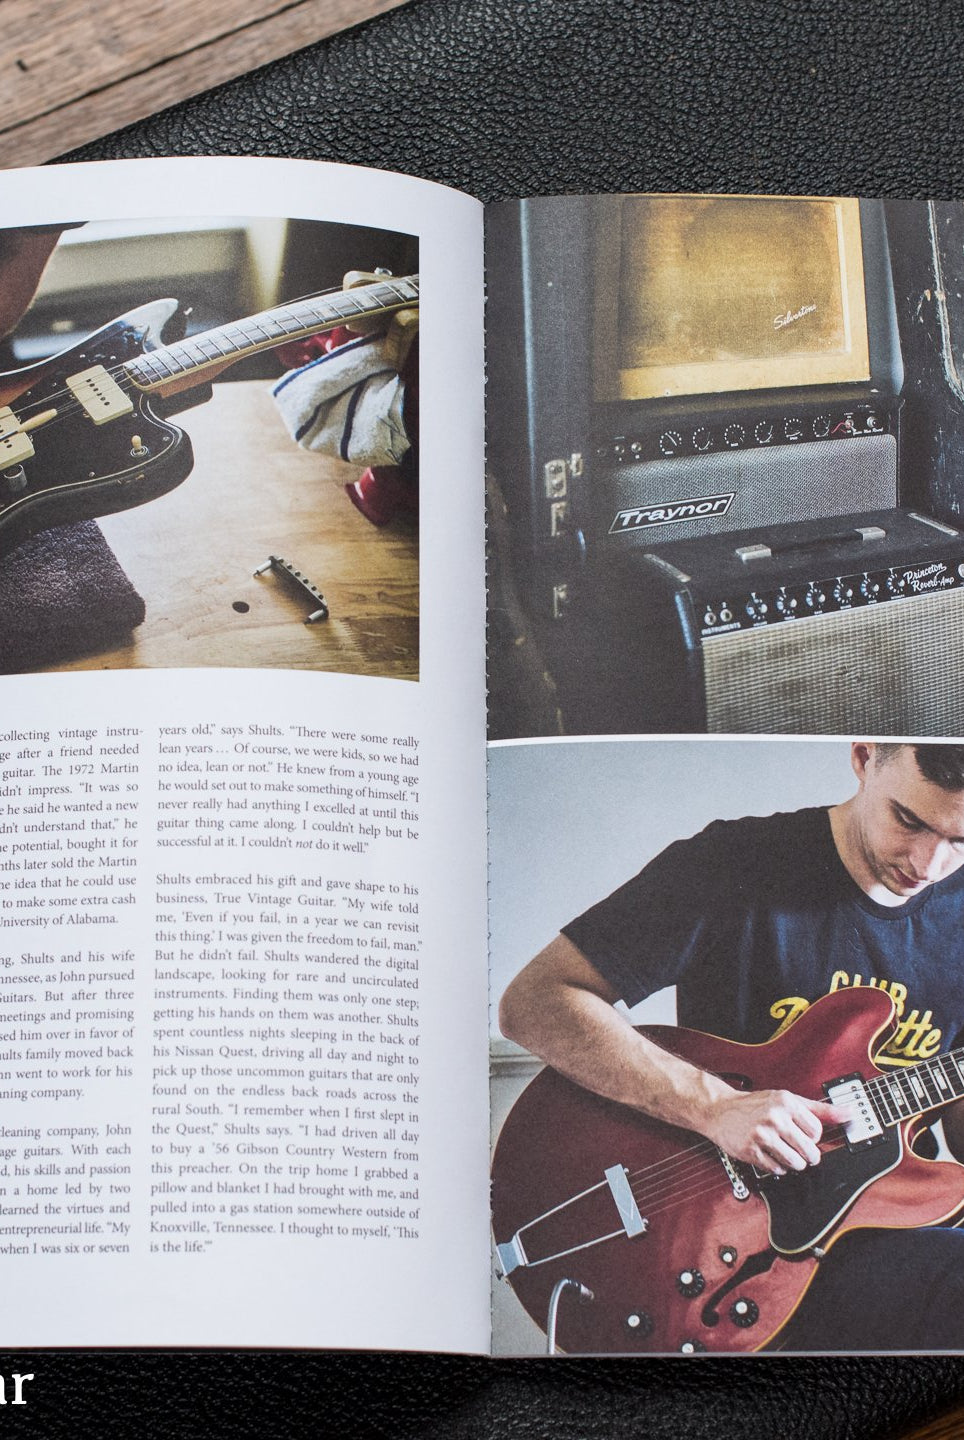 True Vintage Guitar in Iron & Air's Issue #034